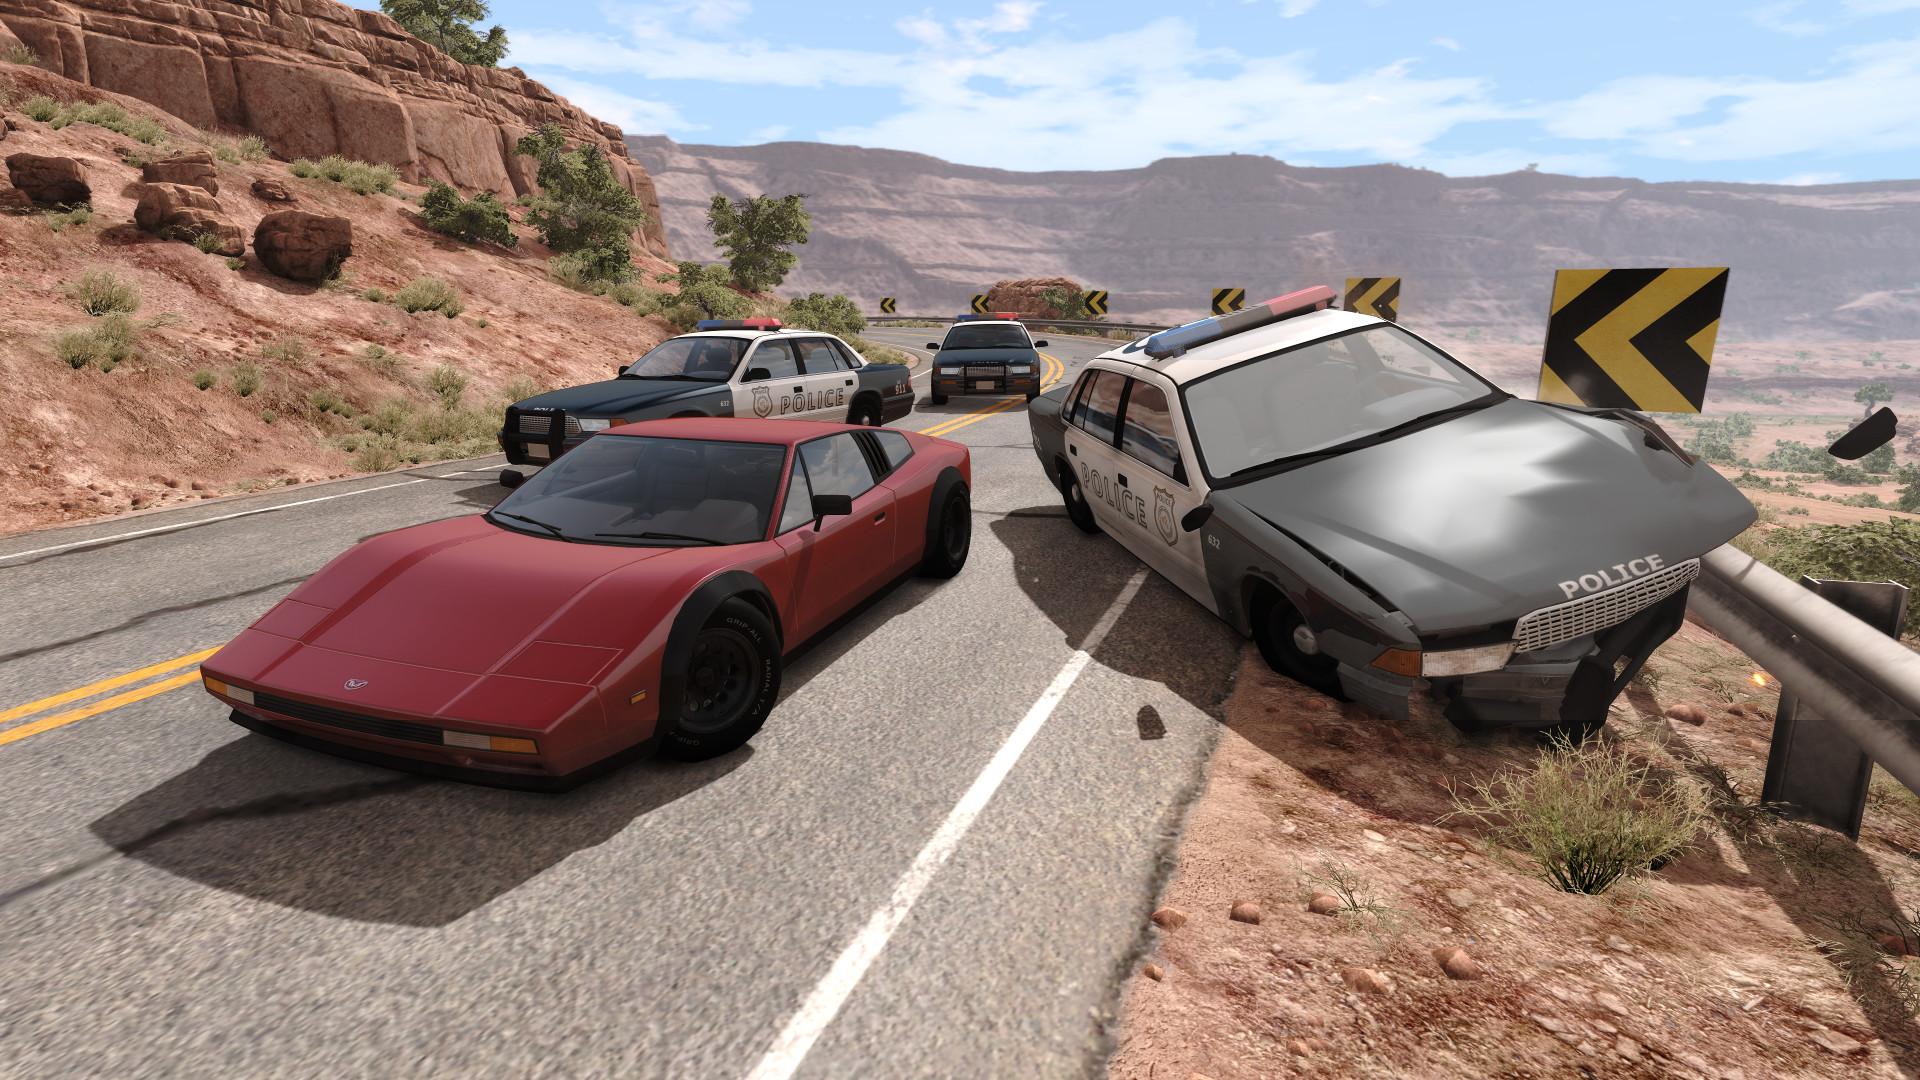 how to get beamng drive